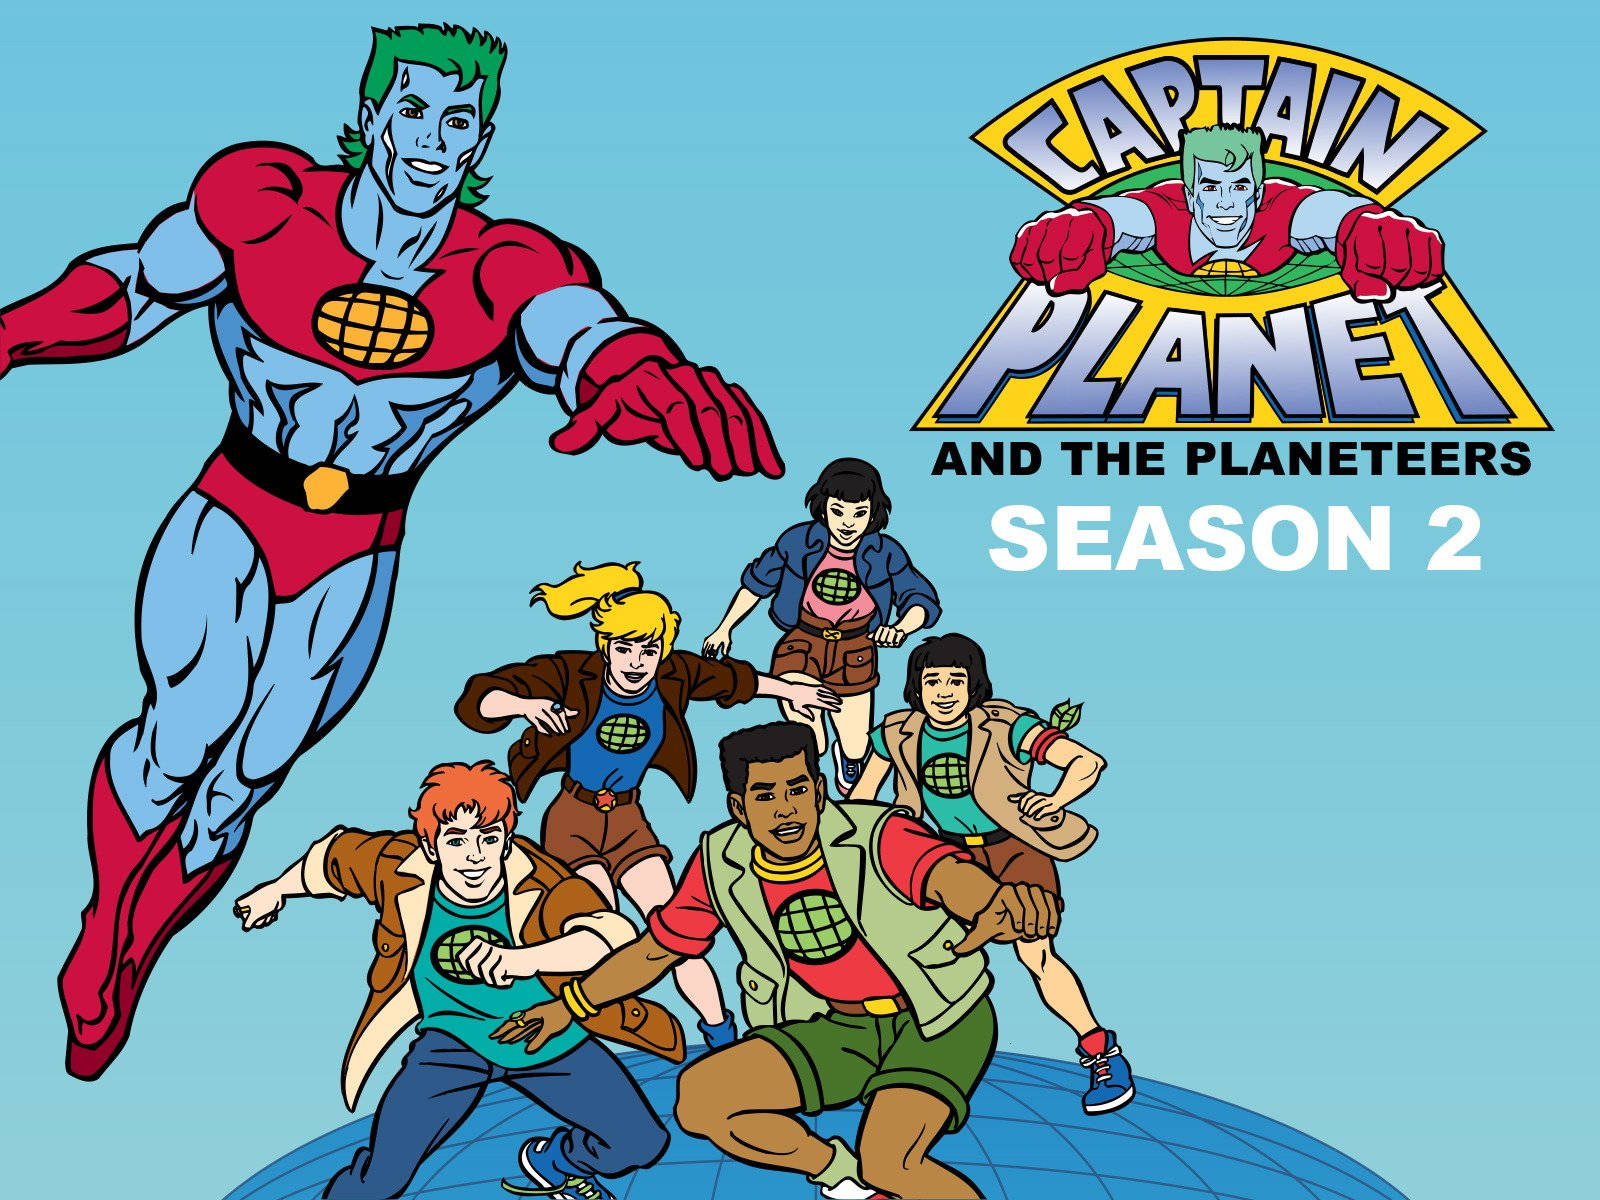 Captain Planet And The Planeteers Season 2 Background